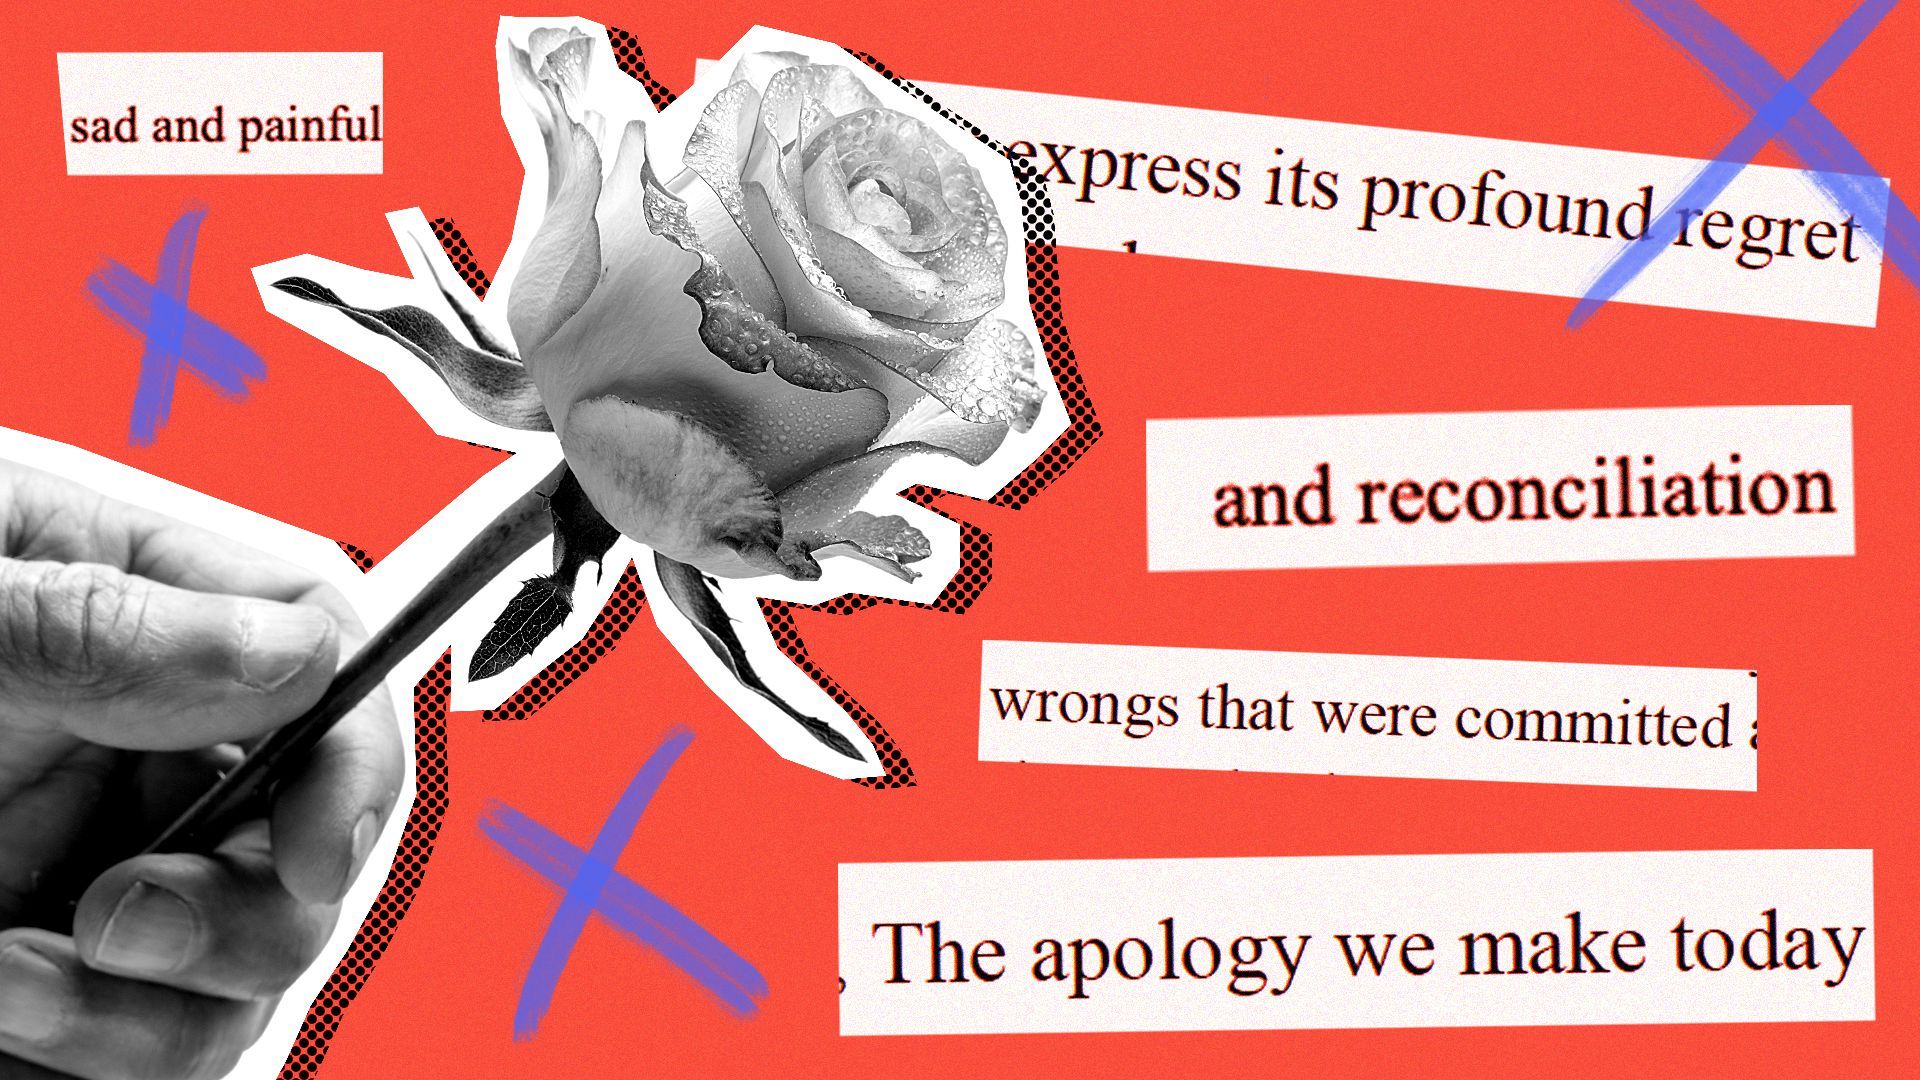 Illustration of a hand holding a rose against tex that reads: "sad and painful", "express its profound regret", "and reconciliation", "wrongs that were committed", and "The apology we make today".